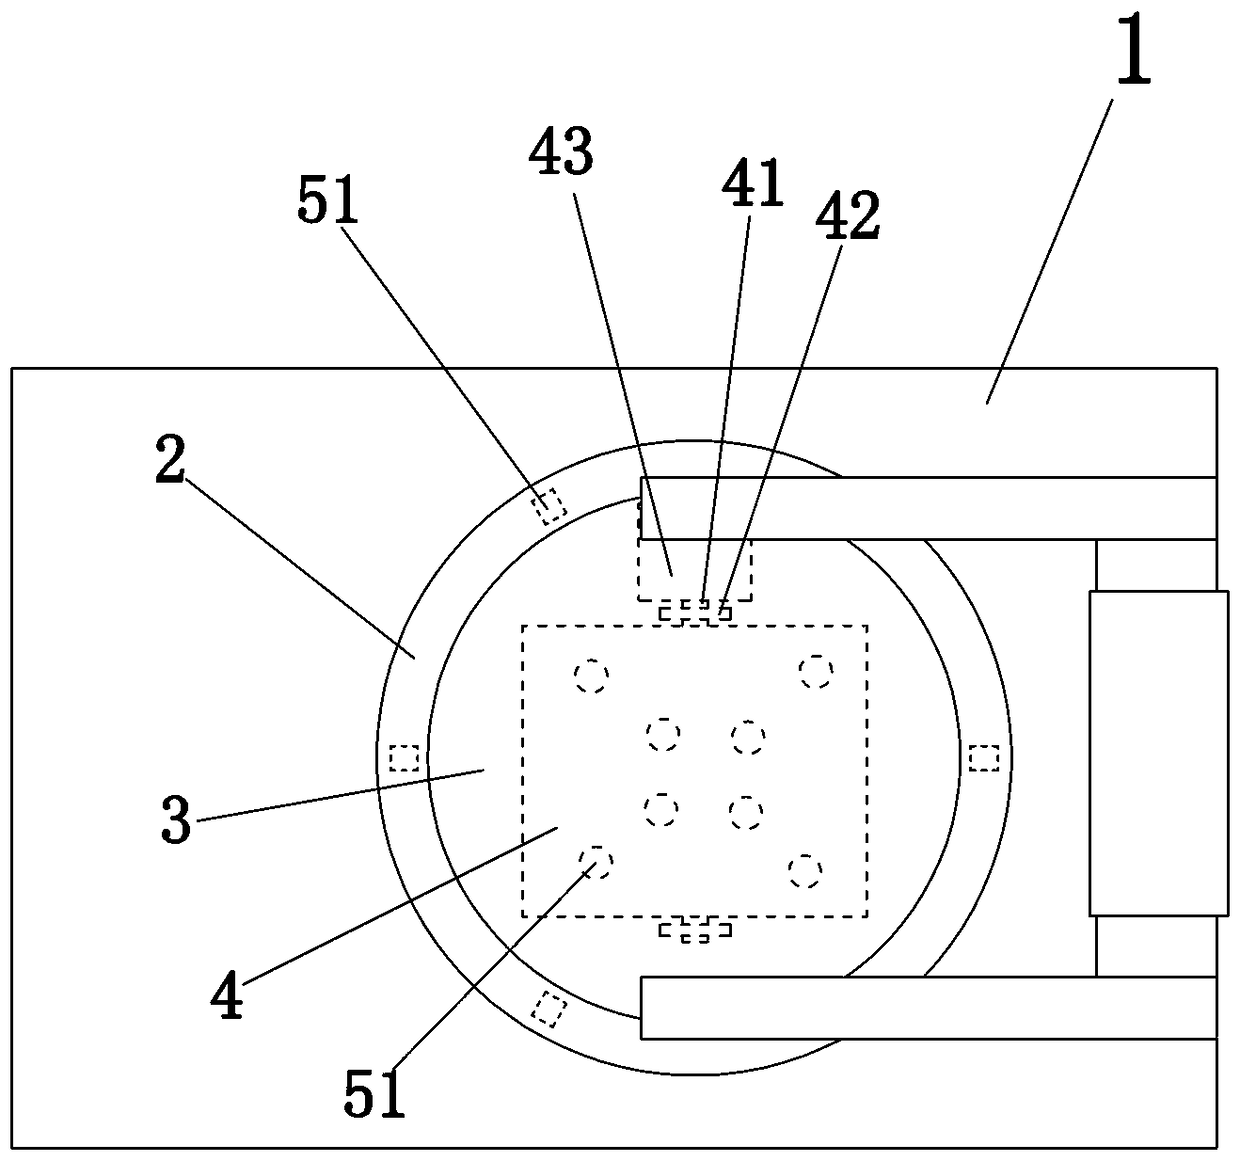 A foot massage customization method based on a foot scanner